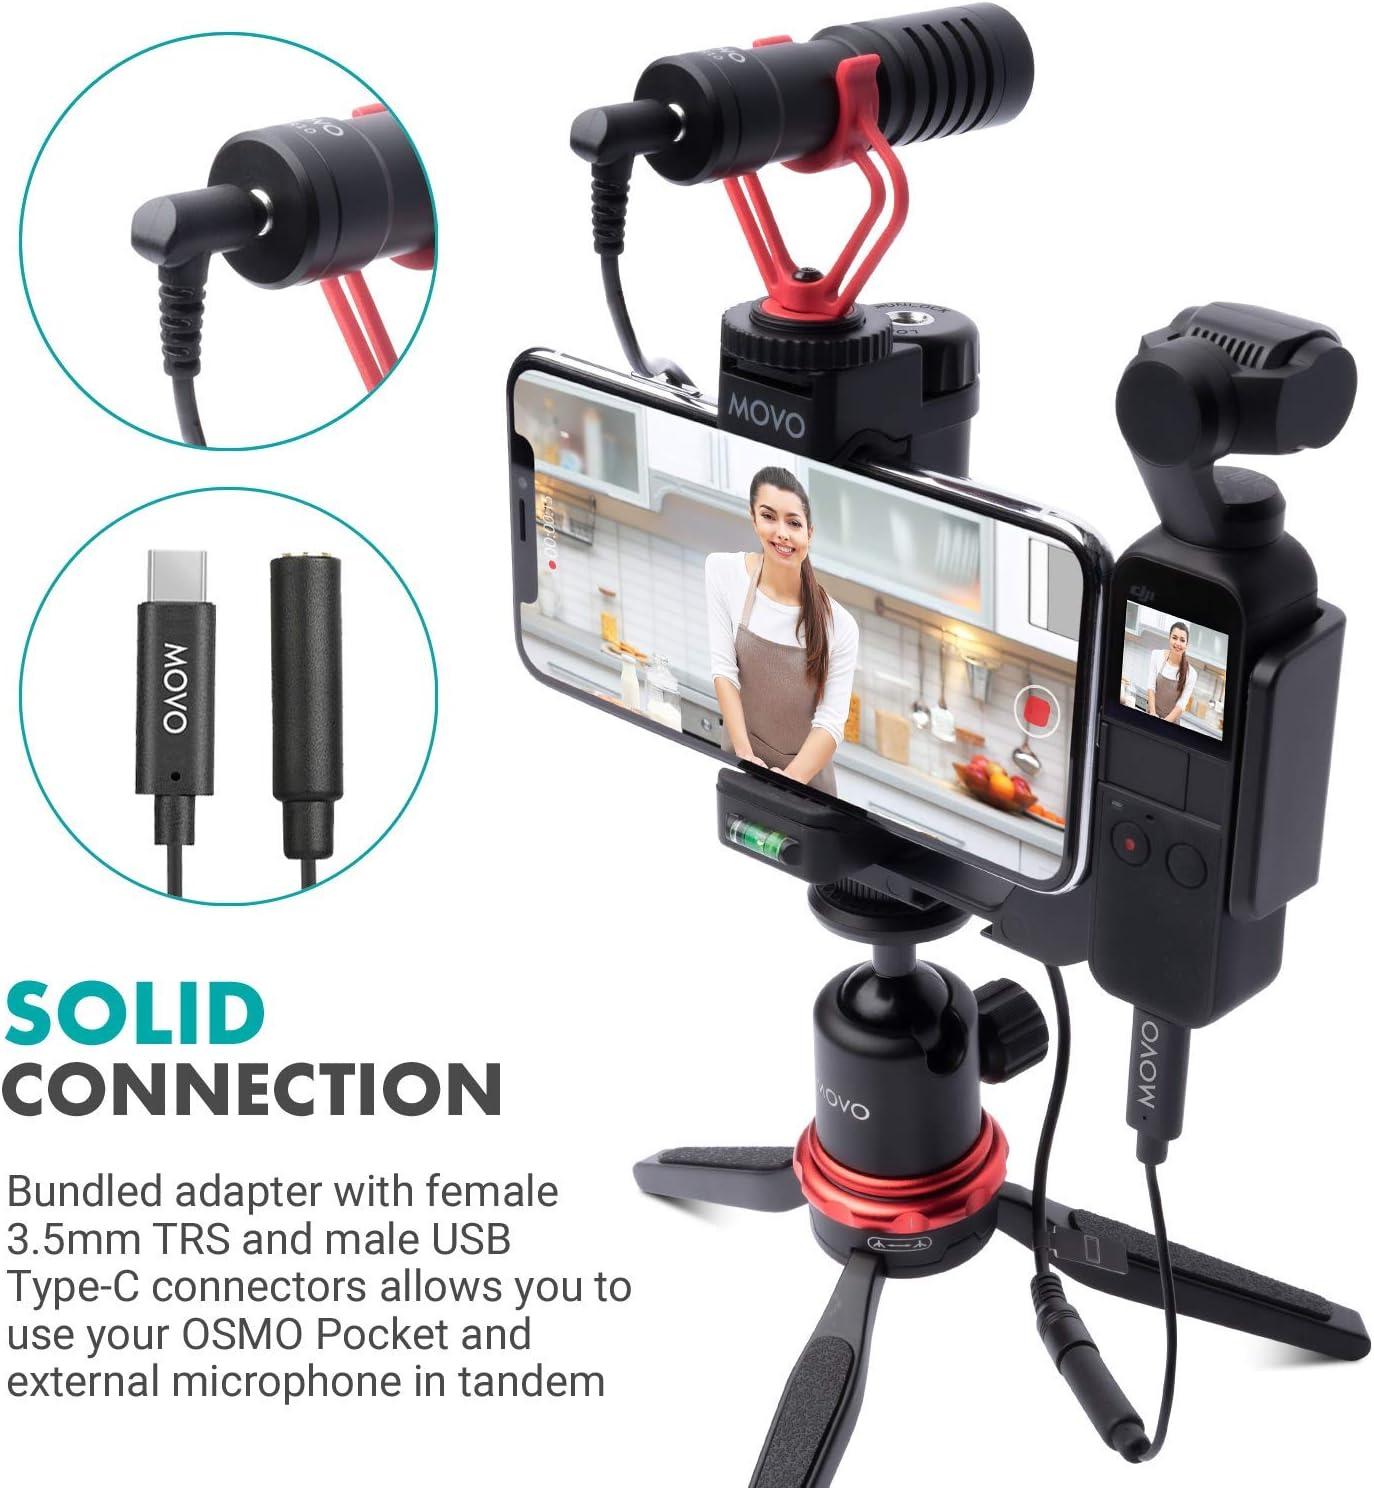 temperatur retning Er deprimeret Movo Vlogging Kit Compatible with DJI OSMO Pocket 1, 2 - Video Rig with  VXR10 External Microphone, Smartphone Tripod Mount, and Type-C Audio  Adapter - Great Bundle for Video and Audio Recording